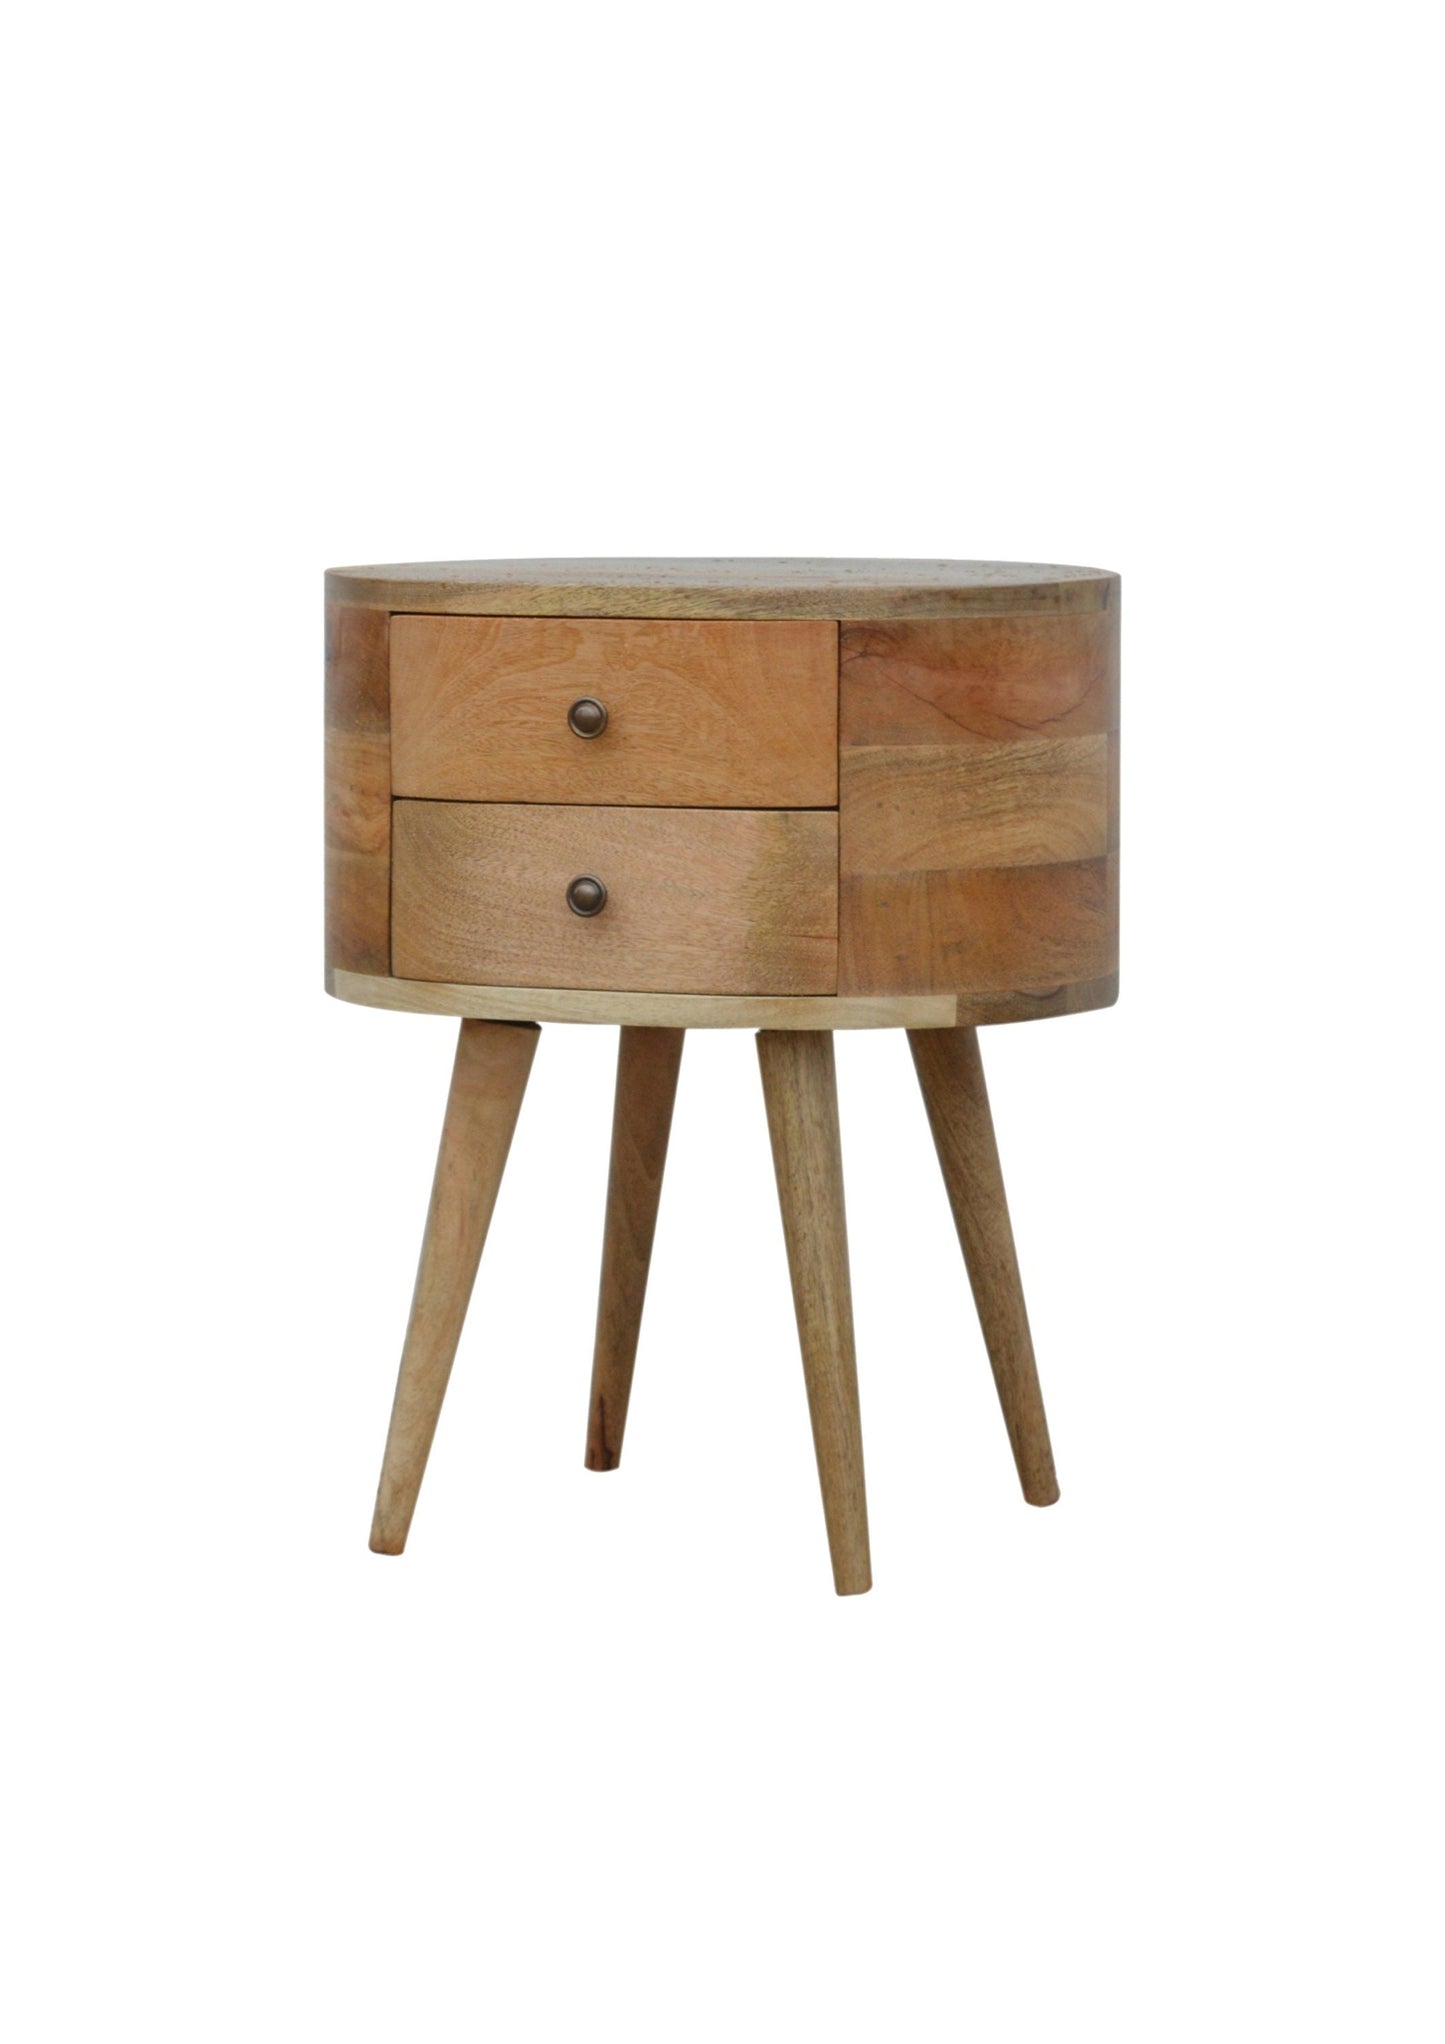 Mid Century Retro Rounded Bedside Table Solid Wood Pre Order for April